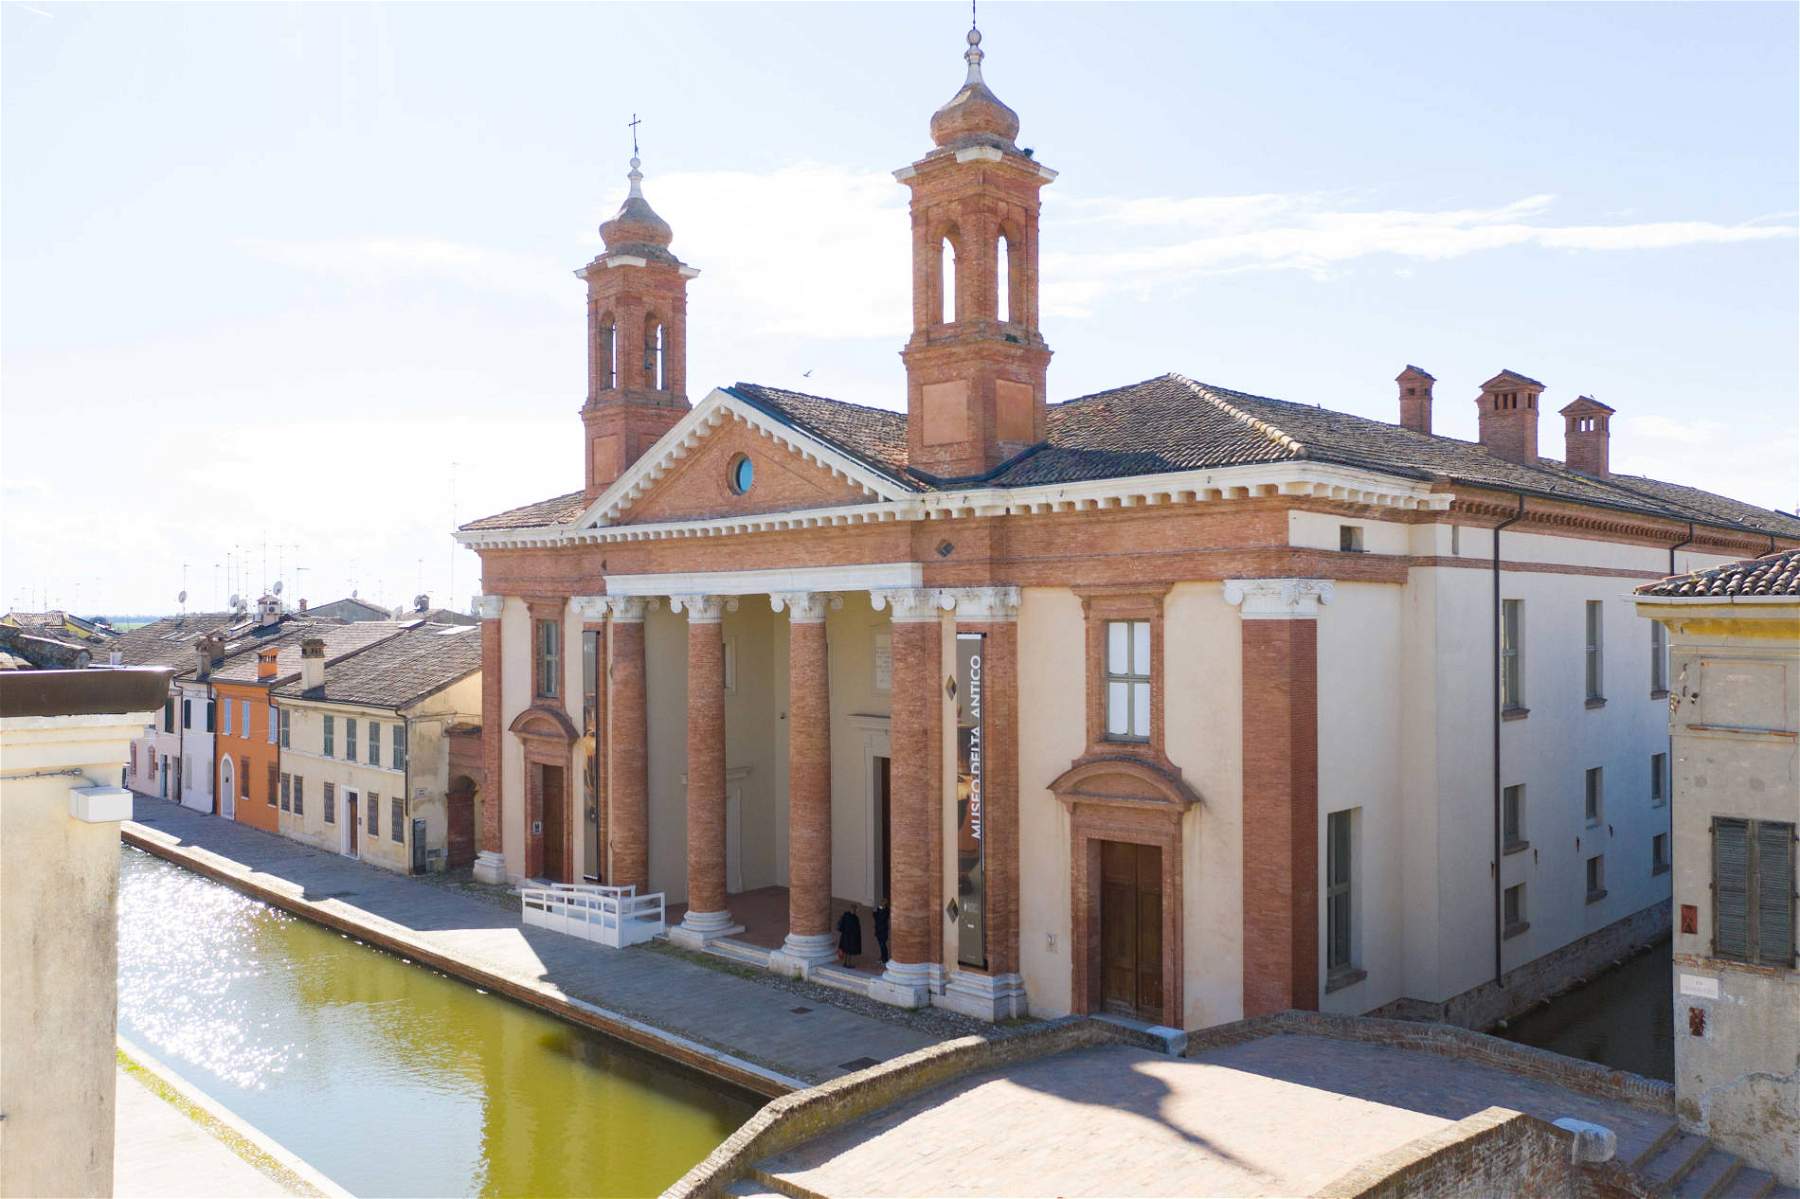 Comacchio celebrates 100 years of the Etruscan city of Spina 